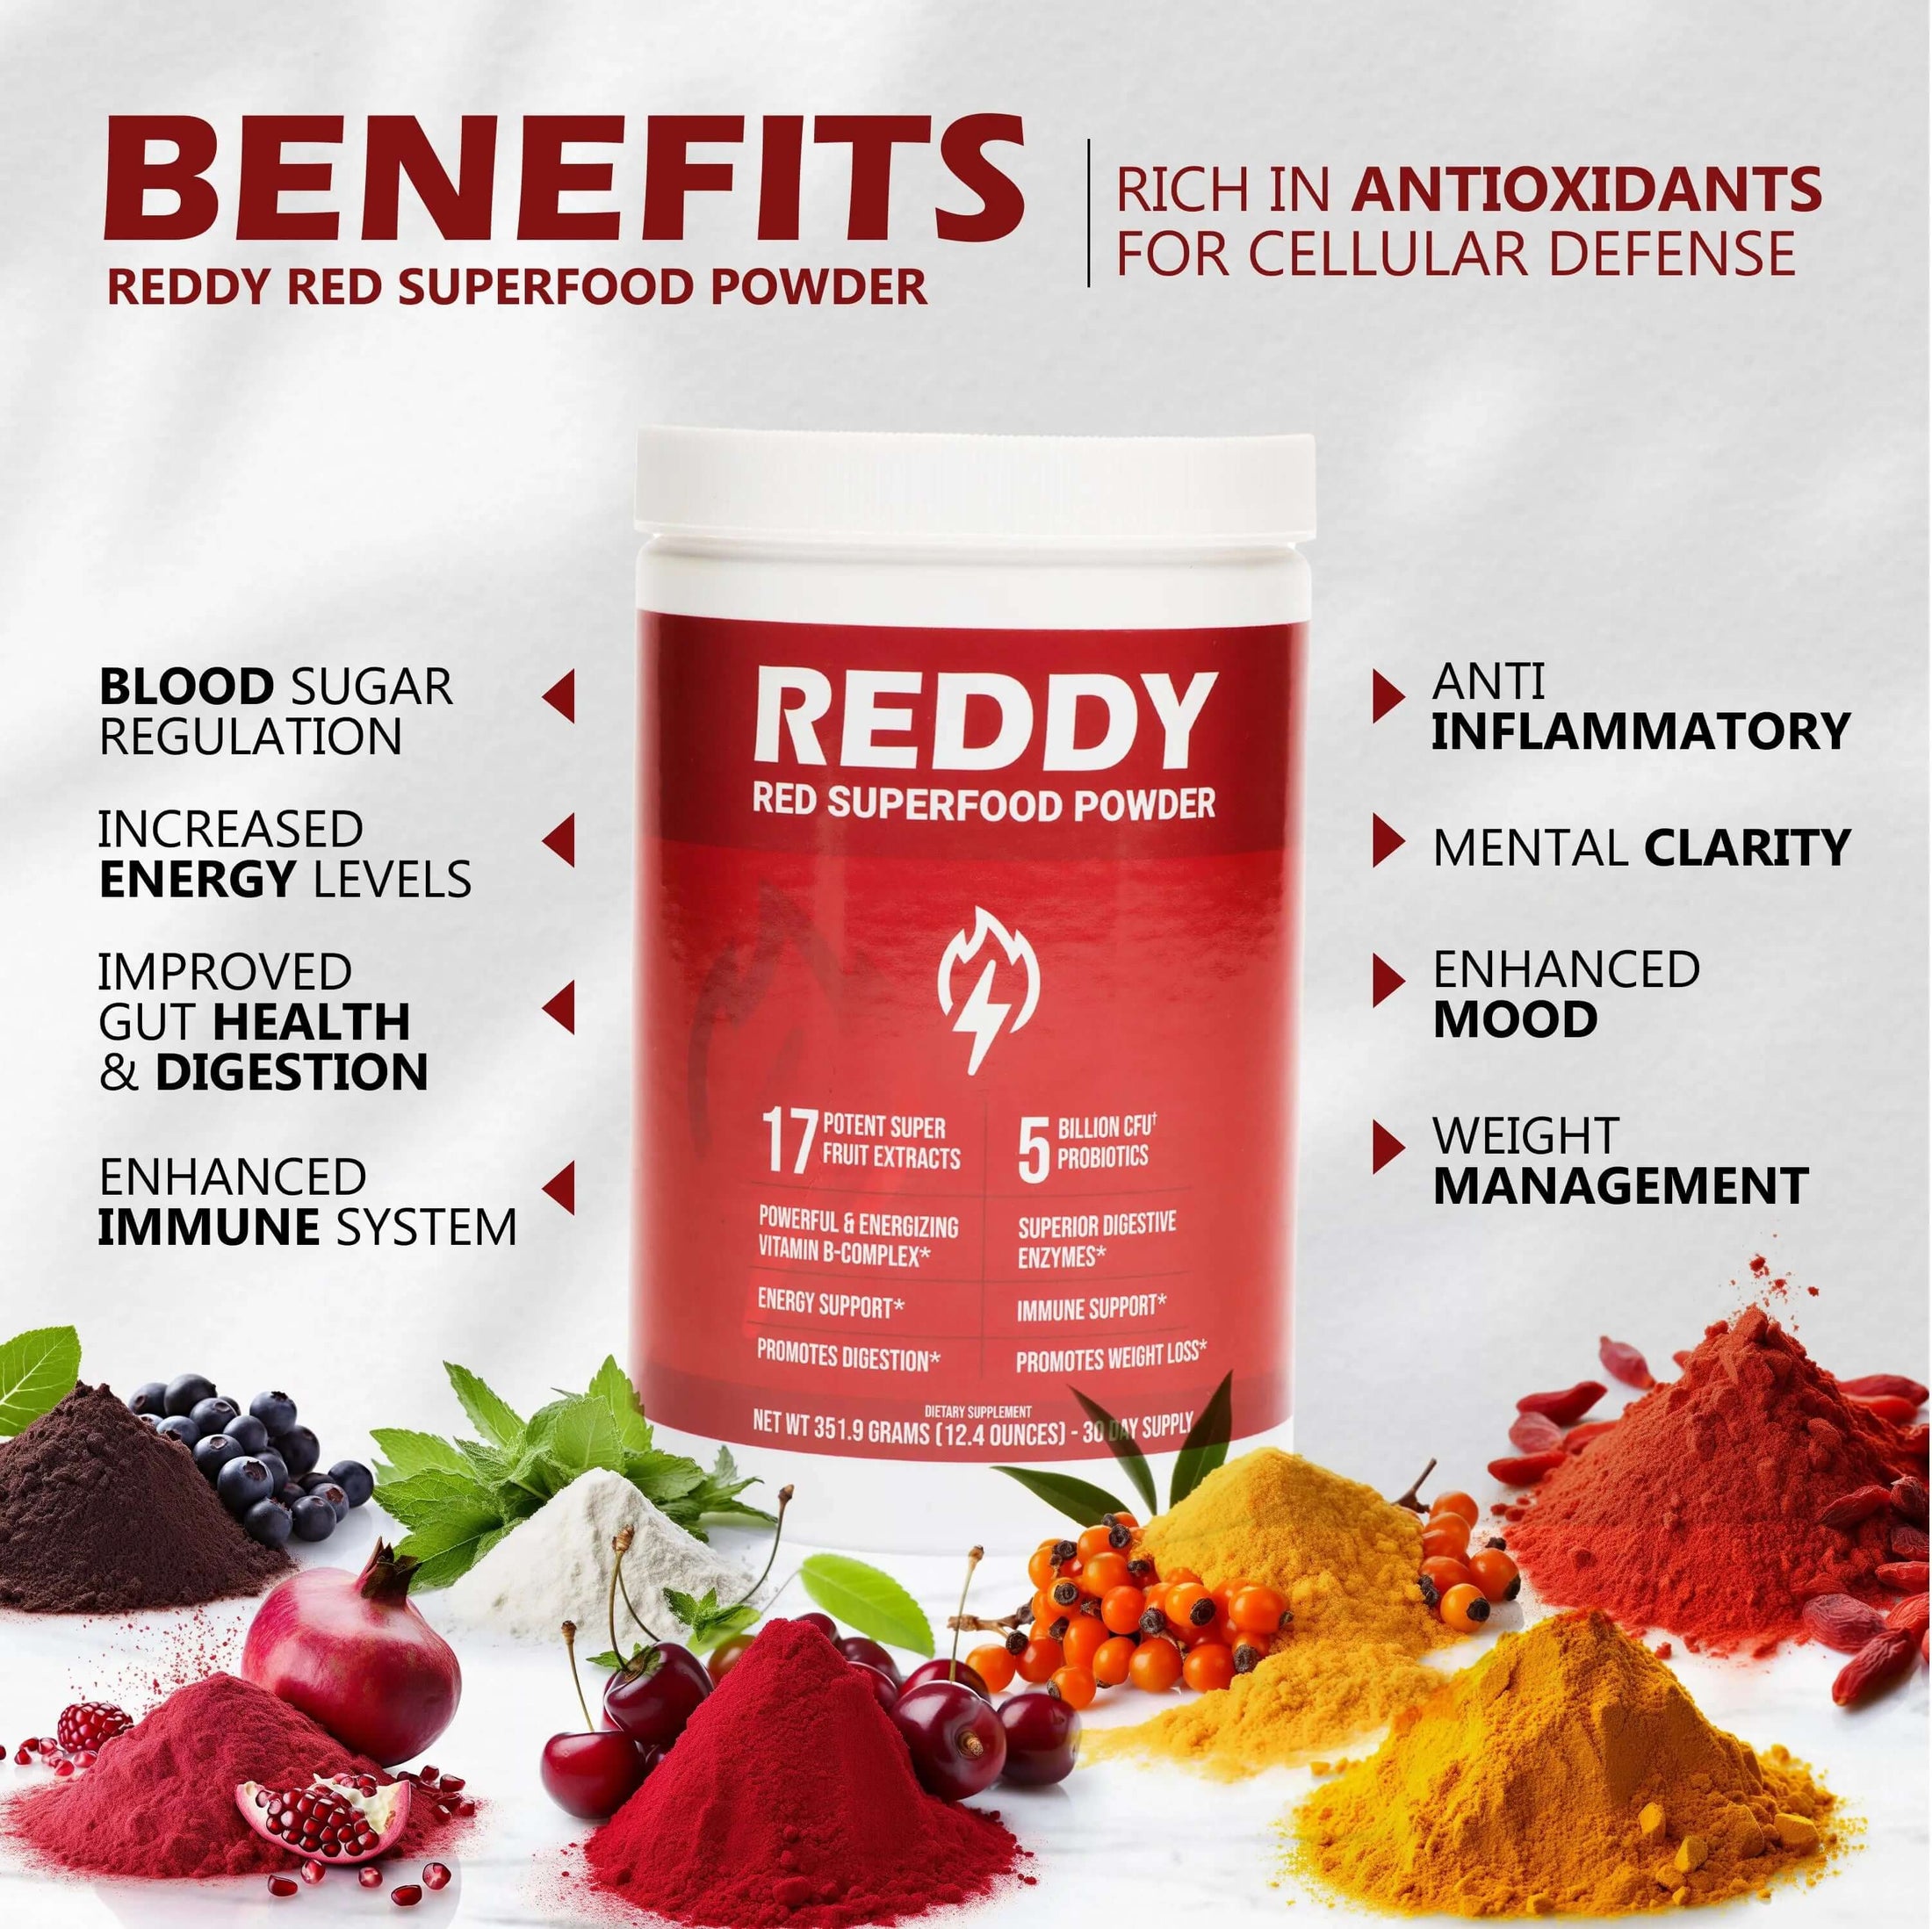 Visual representation of the health benefits of using Reddy Red Organic Superfood Powder, such as increased energy and improved digestion, illustrated with vibrant graphics and icons.